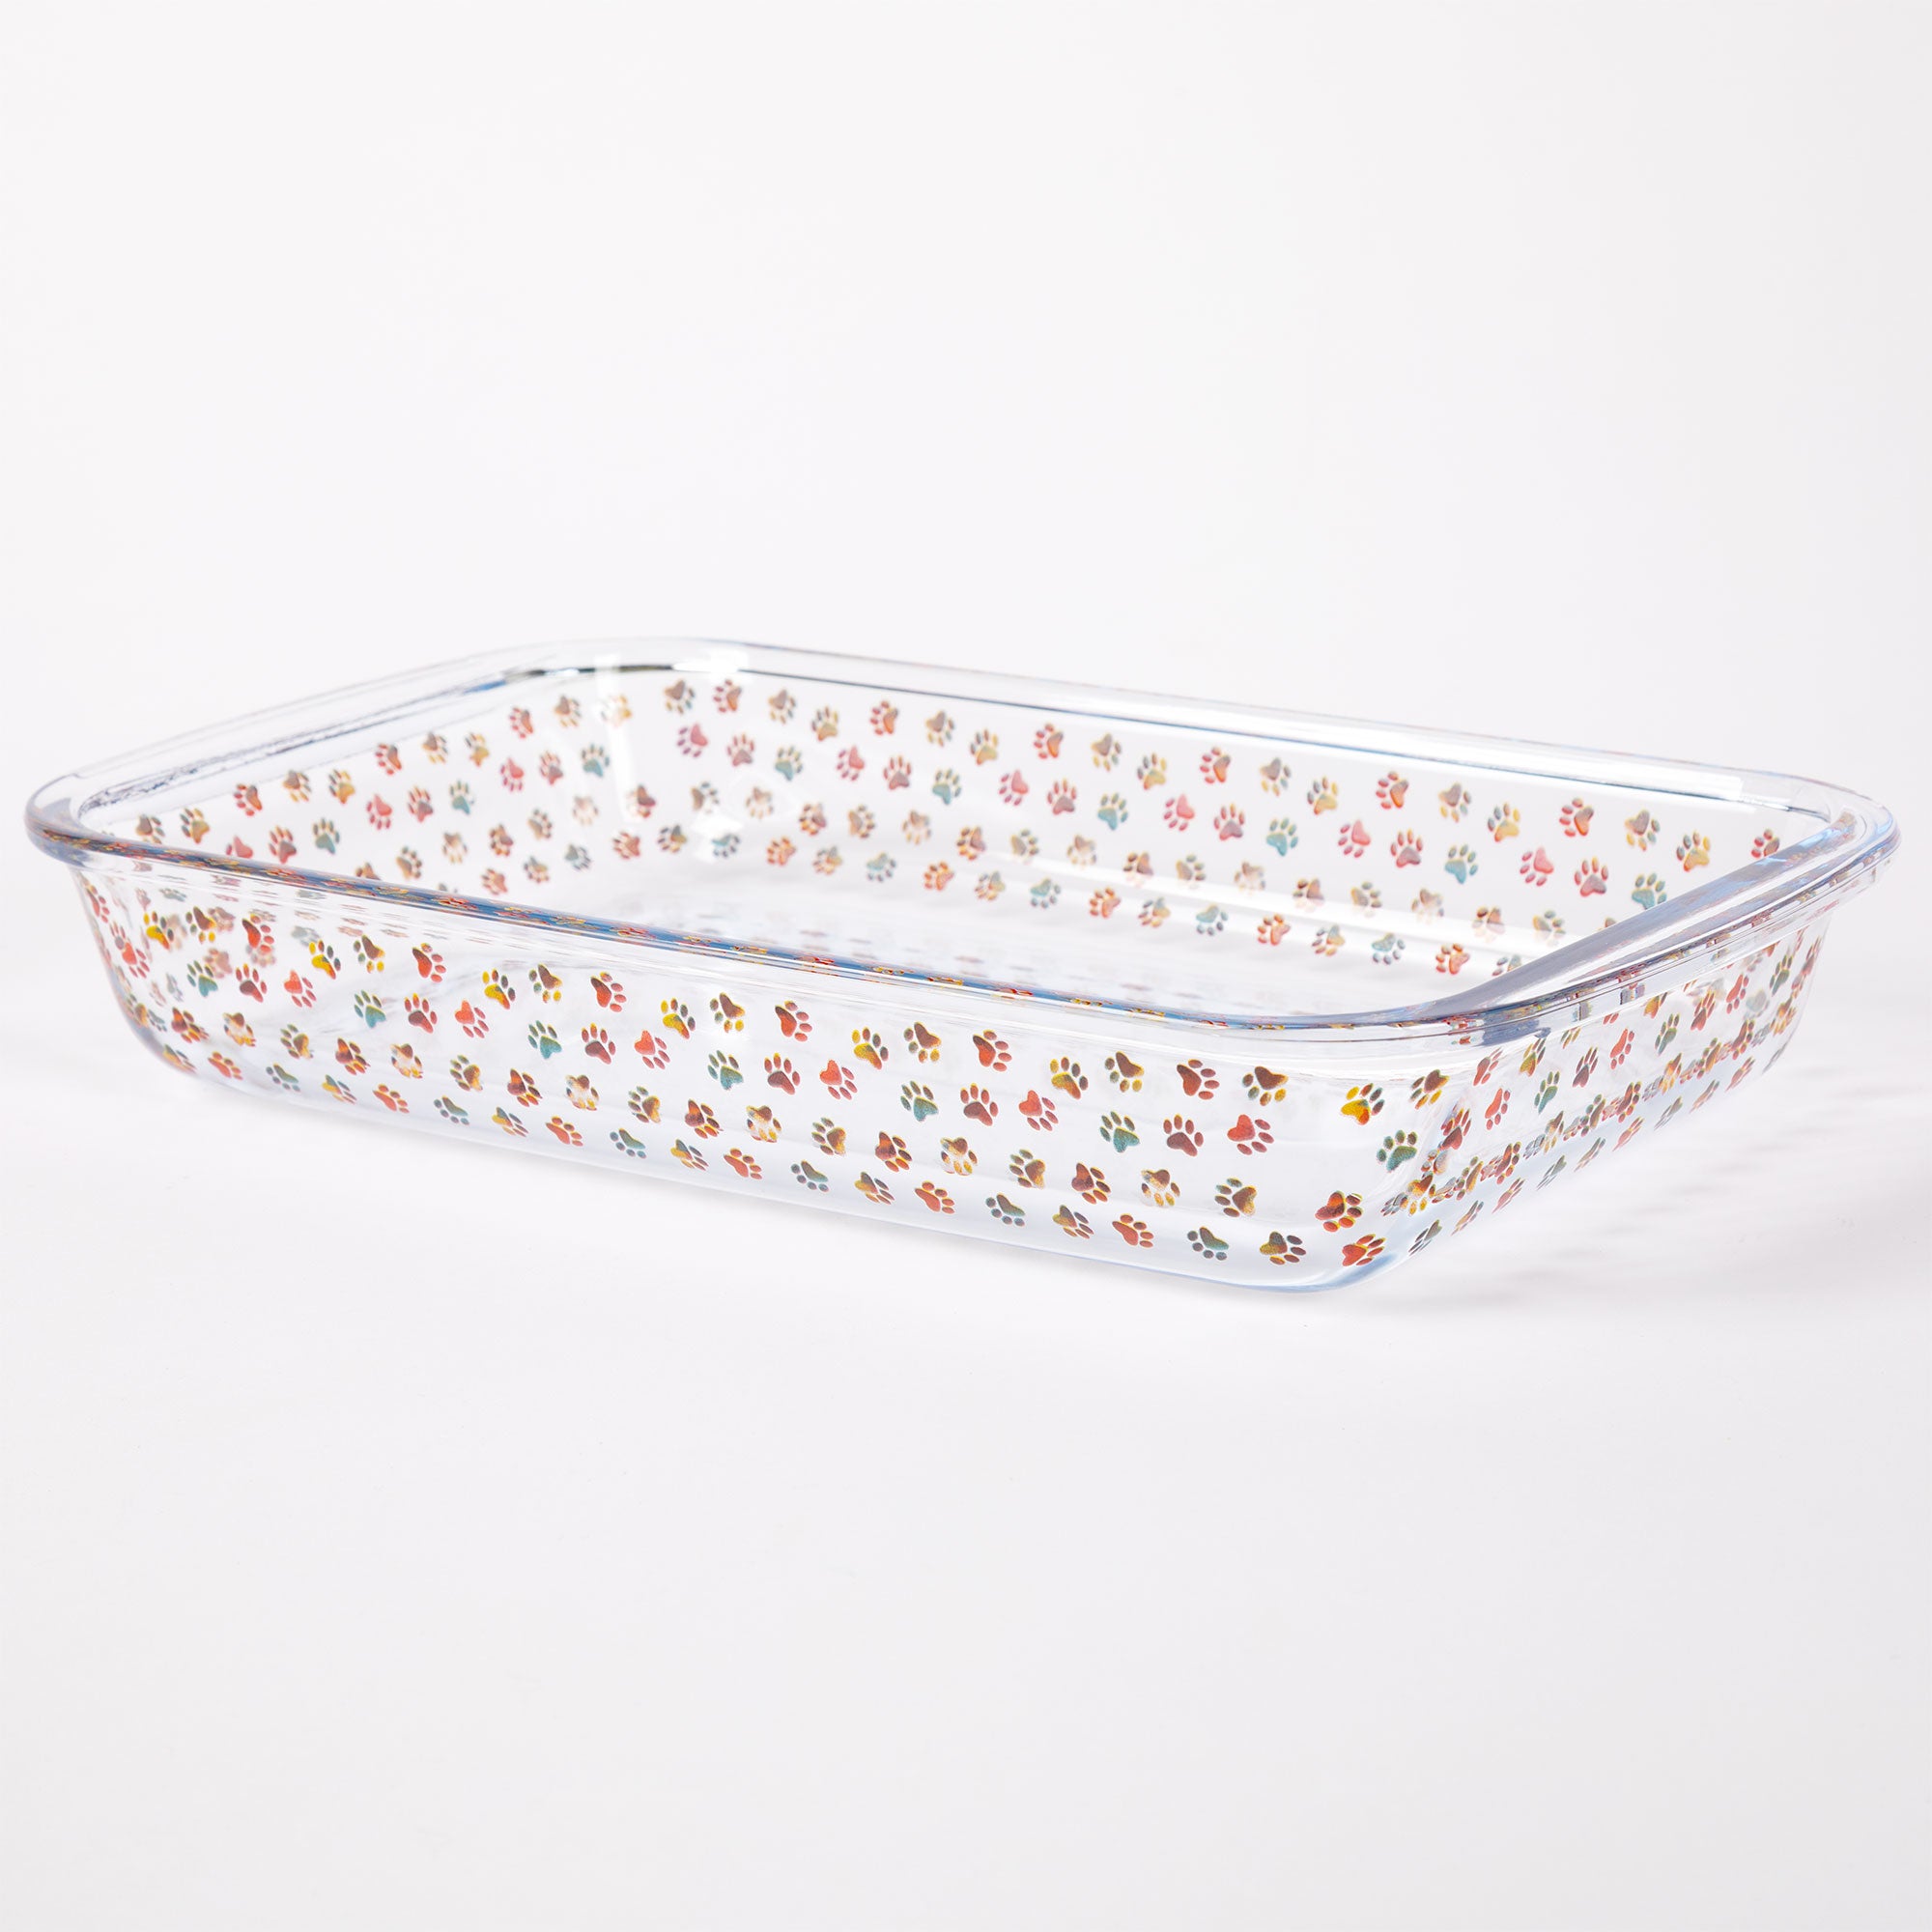 Paws To Bake Glass Baking Dish - Ombre Paws - Rectangle